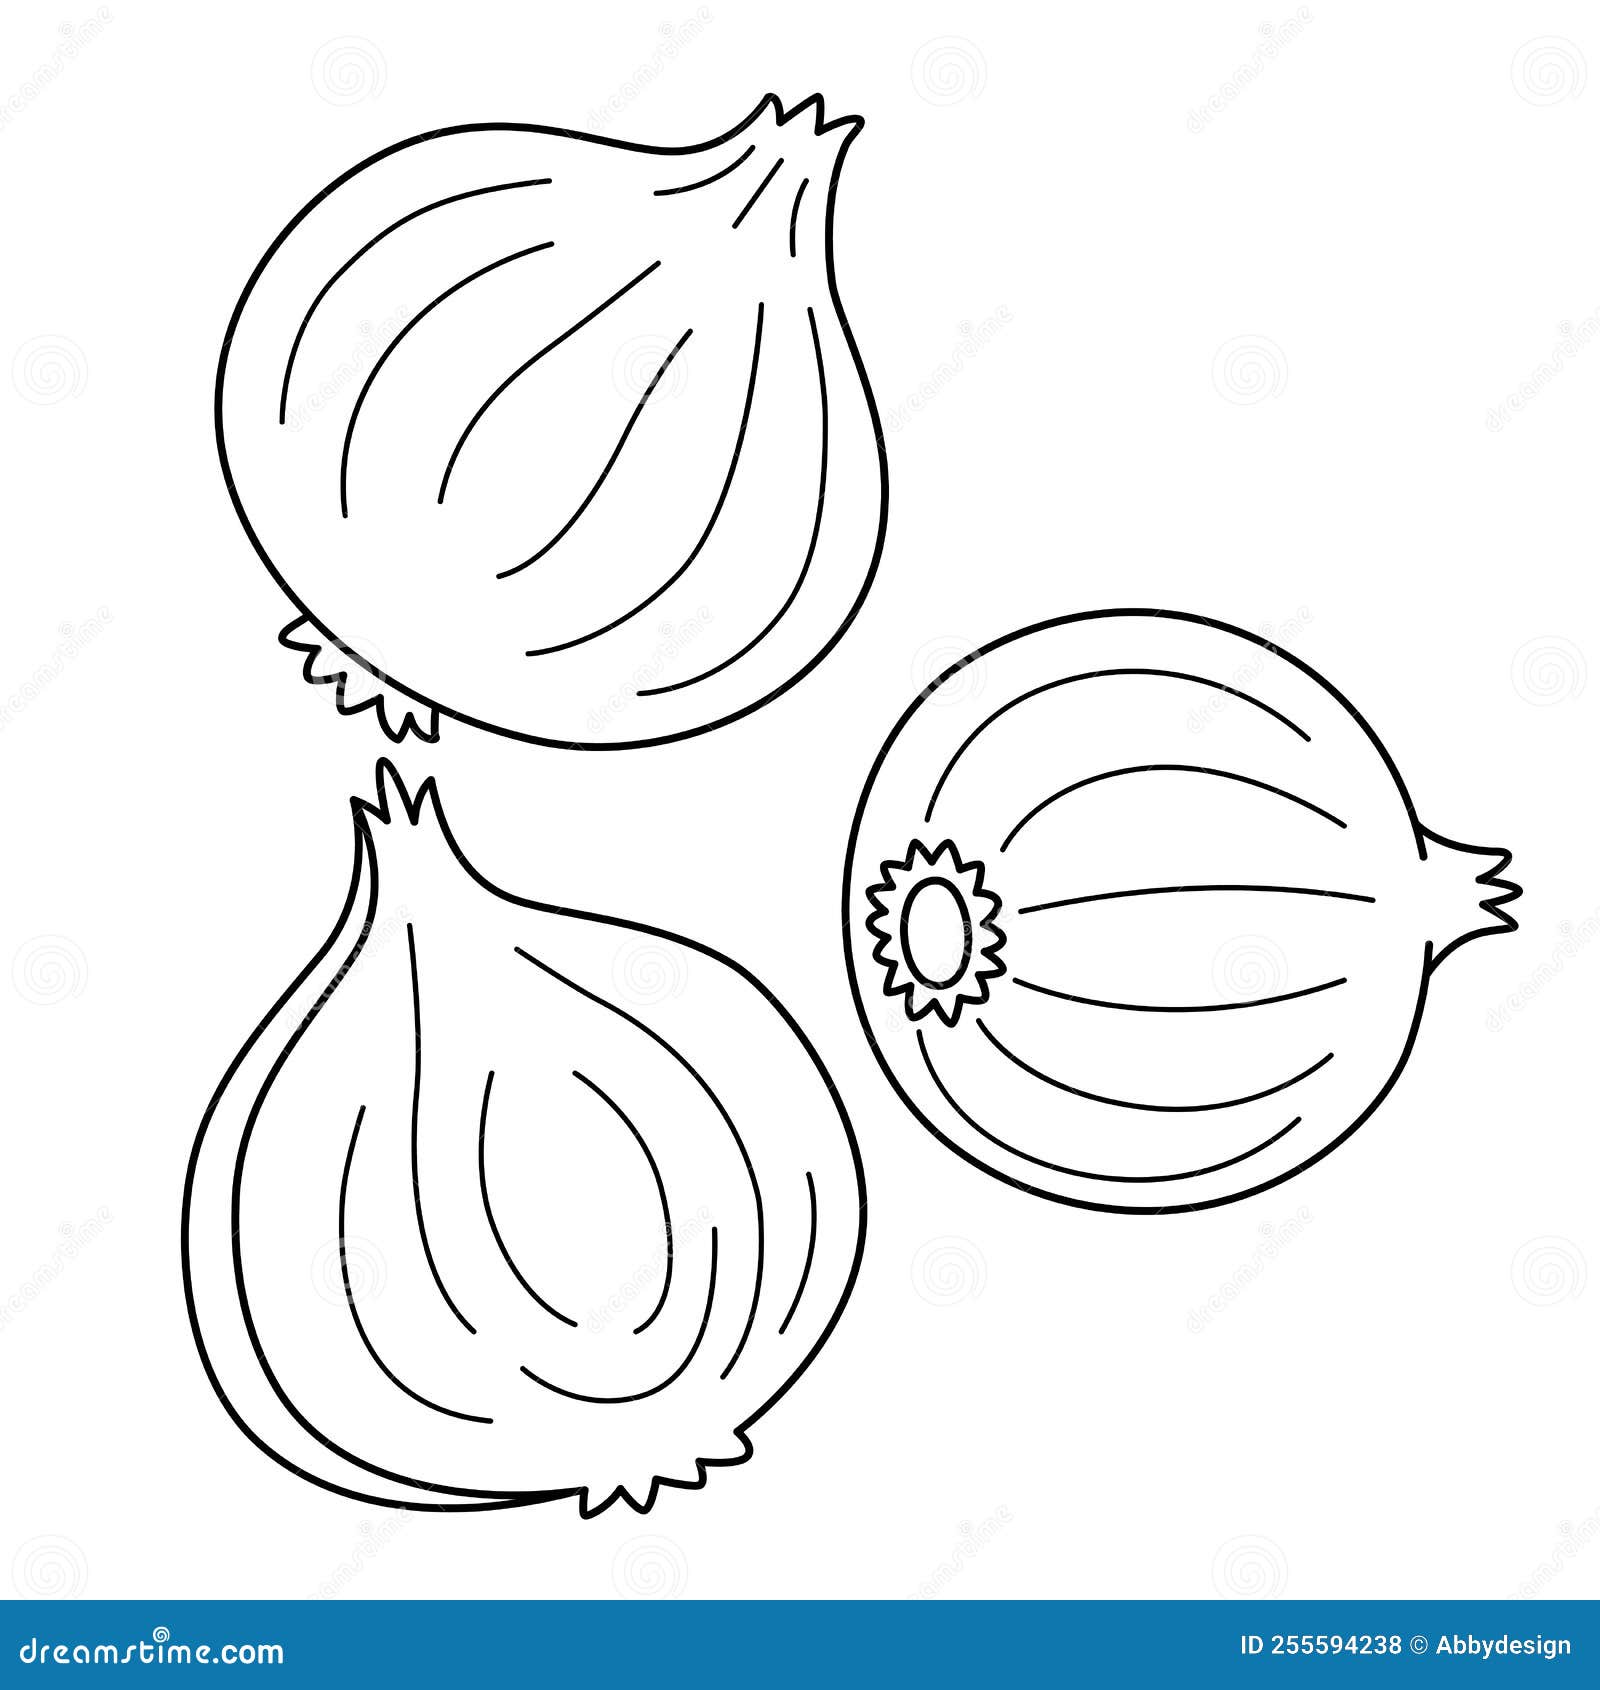 Onion vegetable isolated coloring page for kids stock vector